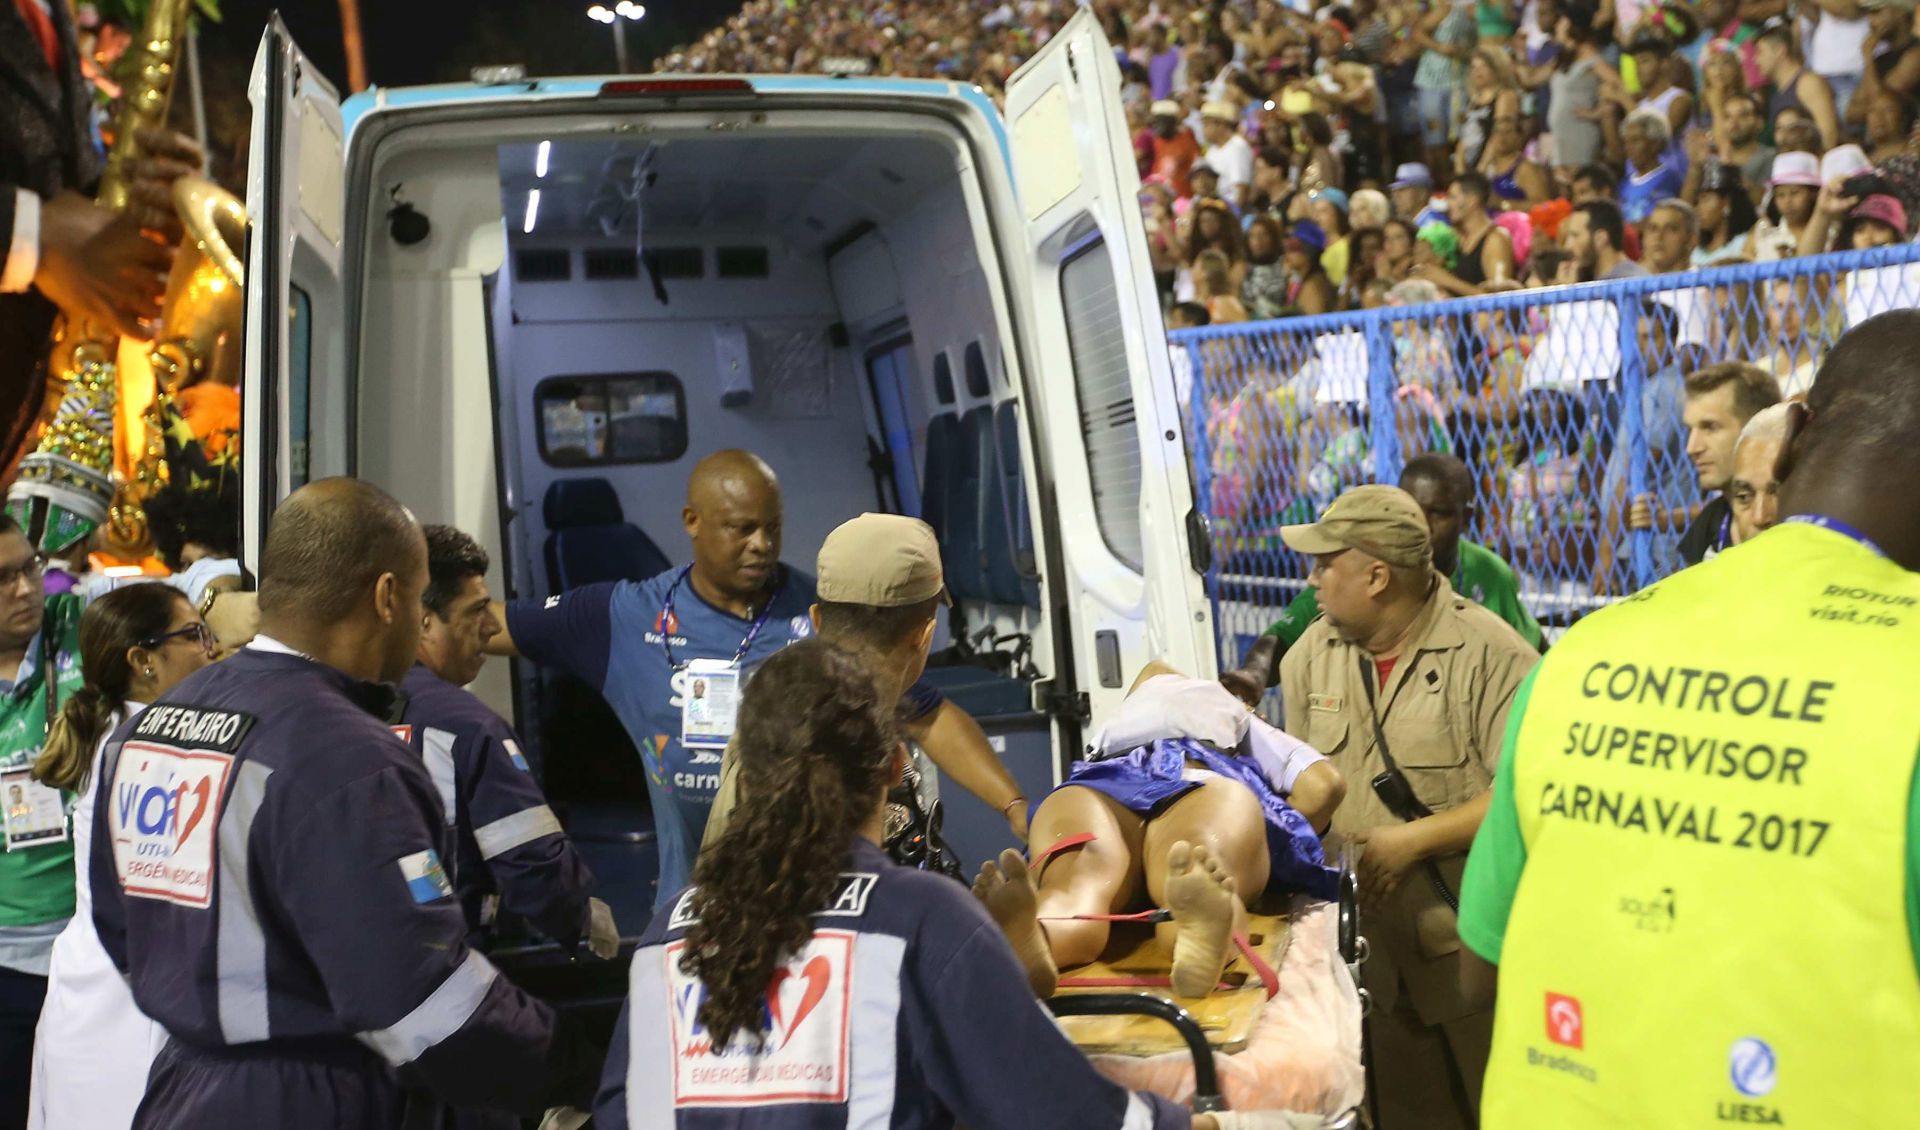 epa05819907 Medical team assists an injured person following an accident during the passing-by of the Unidos de Tijuca samba school of during a carnival parade at the Sambodromo in Rio de Janeiro, Brazil, 27 February 2017. Rio's Sambodromo hosted the last day of this year's carnival parades with a programme that presented a tight competition between the best samba schools in the world.  EPA/MARCELO SAYAO